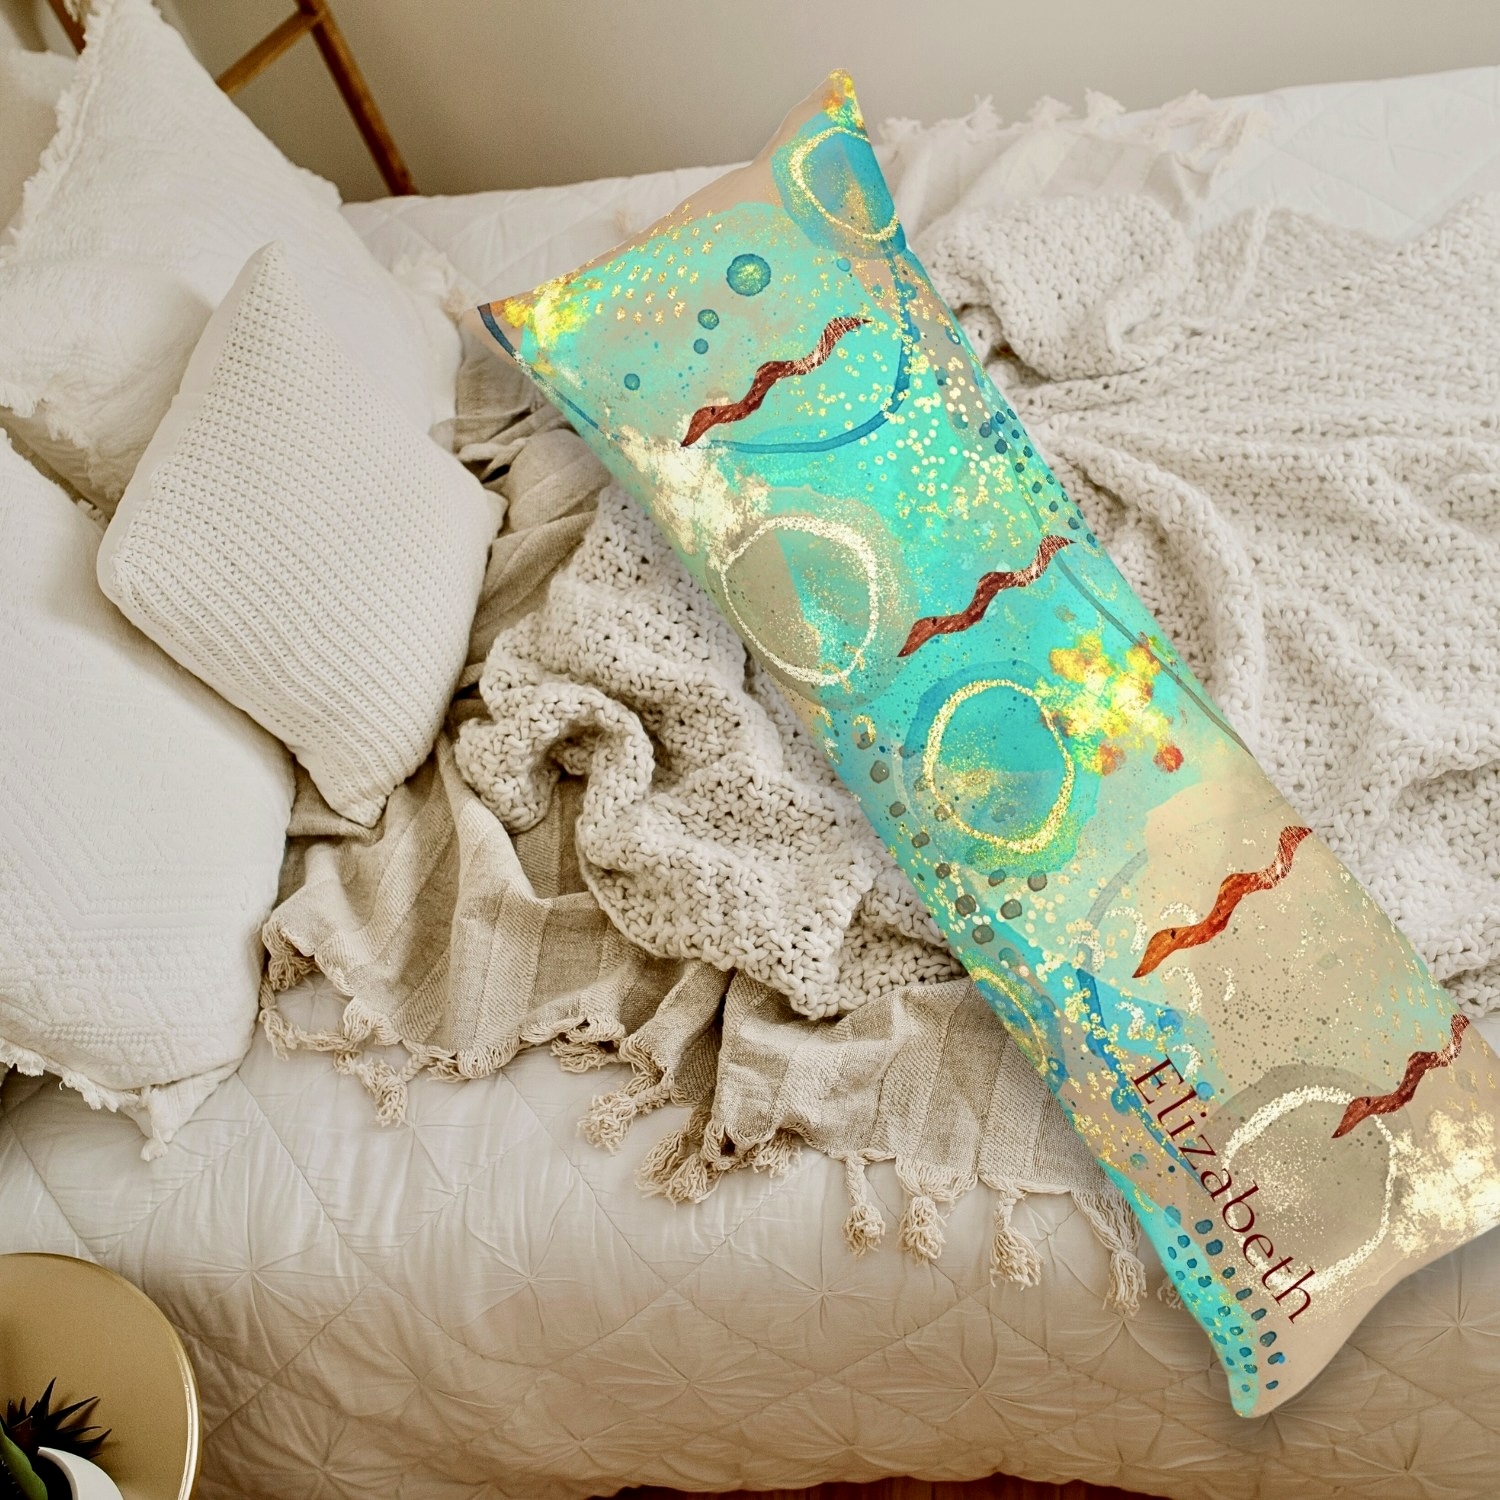 Turquoise Golden Body Pillow: Experience the harmonious blend of ancient wisdom and modern comfort.